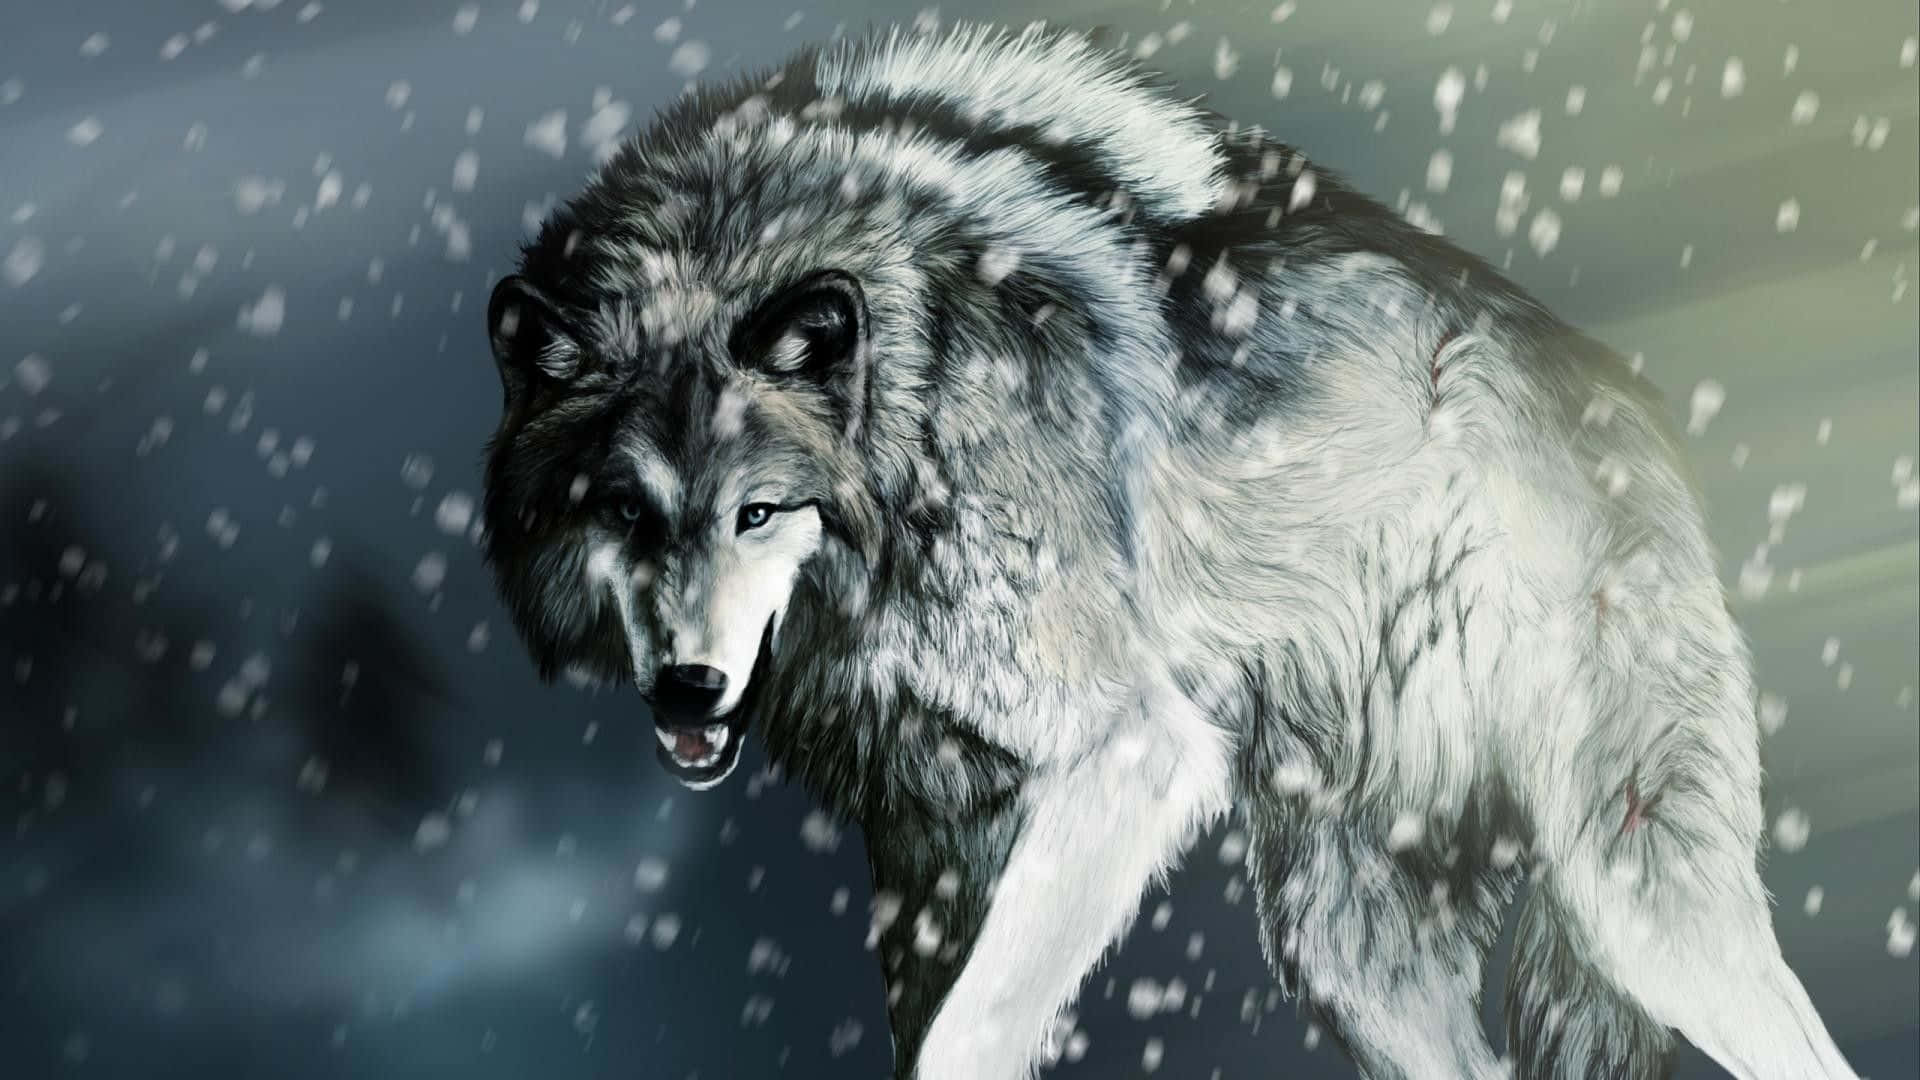 Free Wolf Wallpaper Downloads, [400+] Wolf Wallpapers for FREE | Wallpapers .com